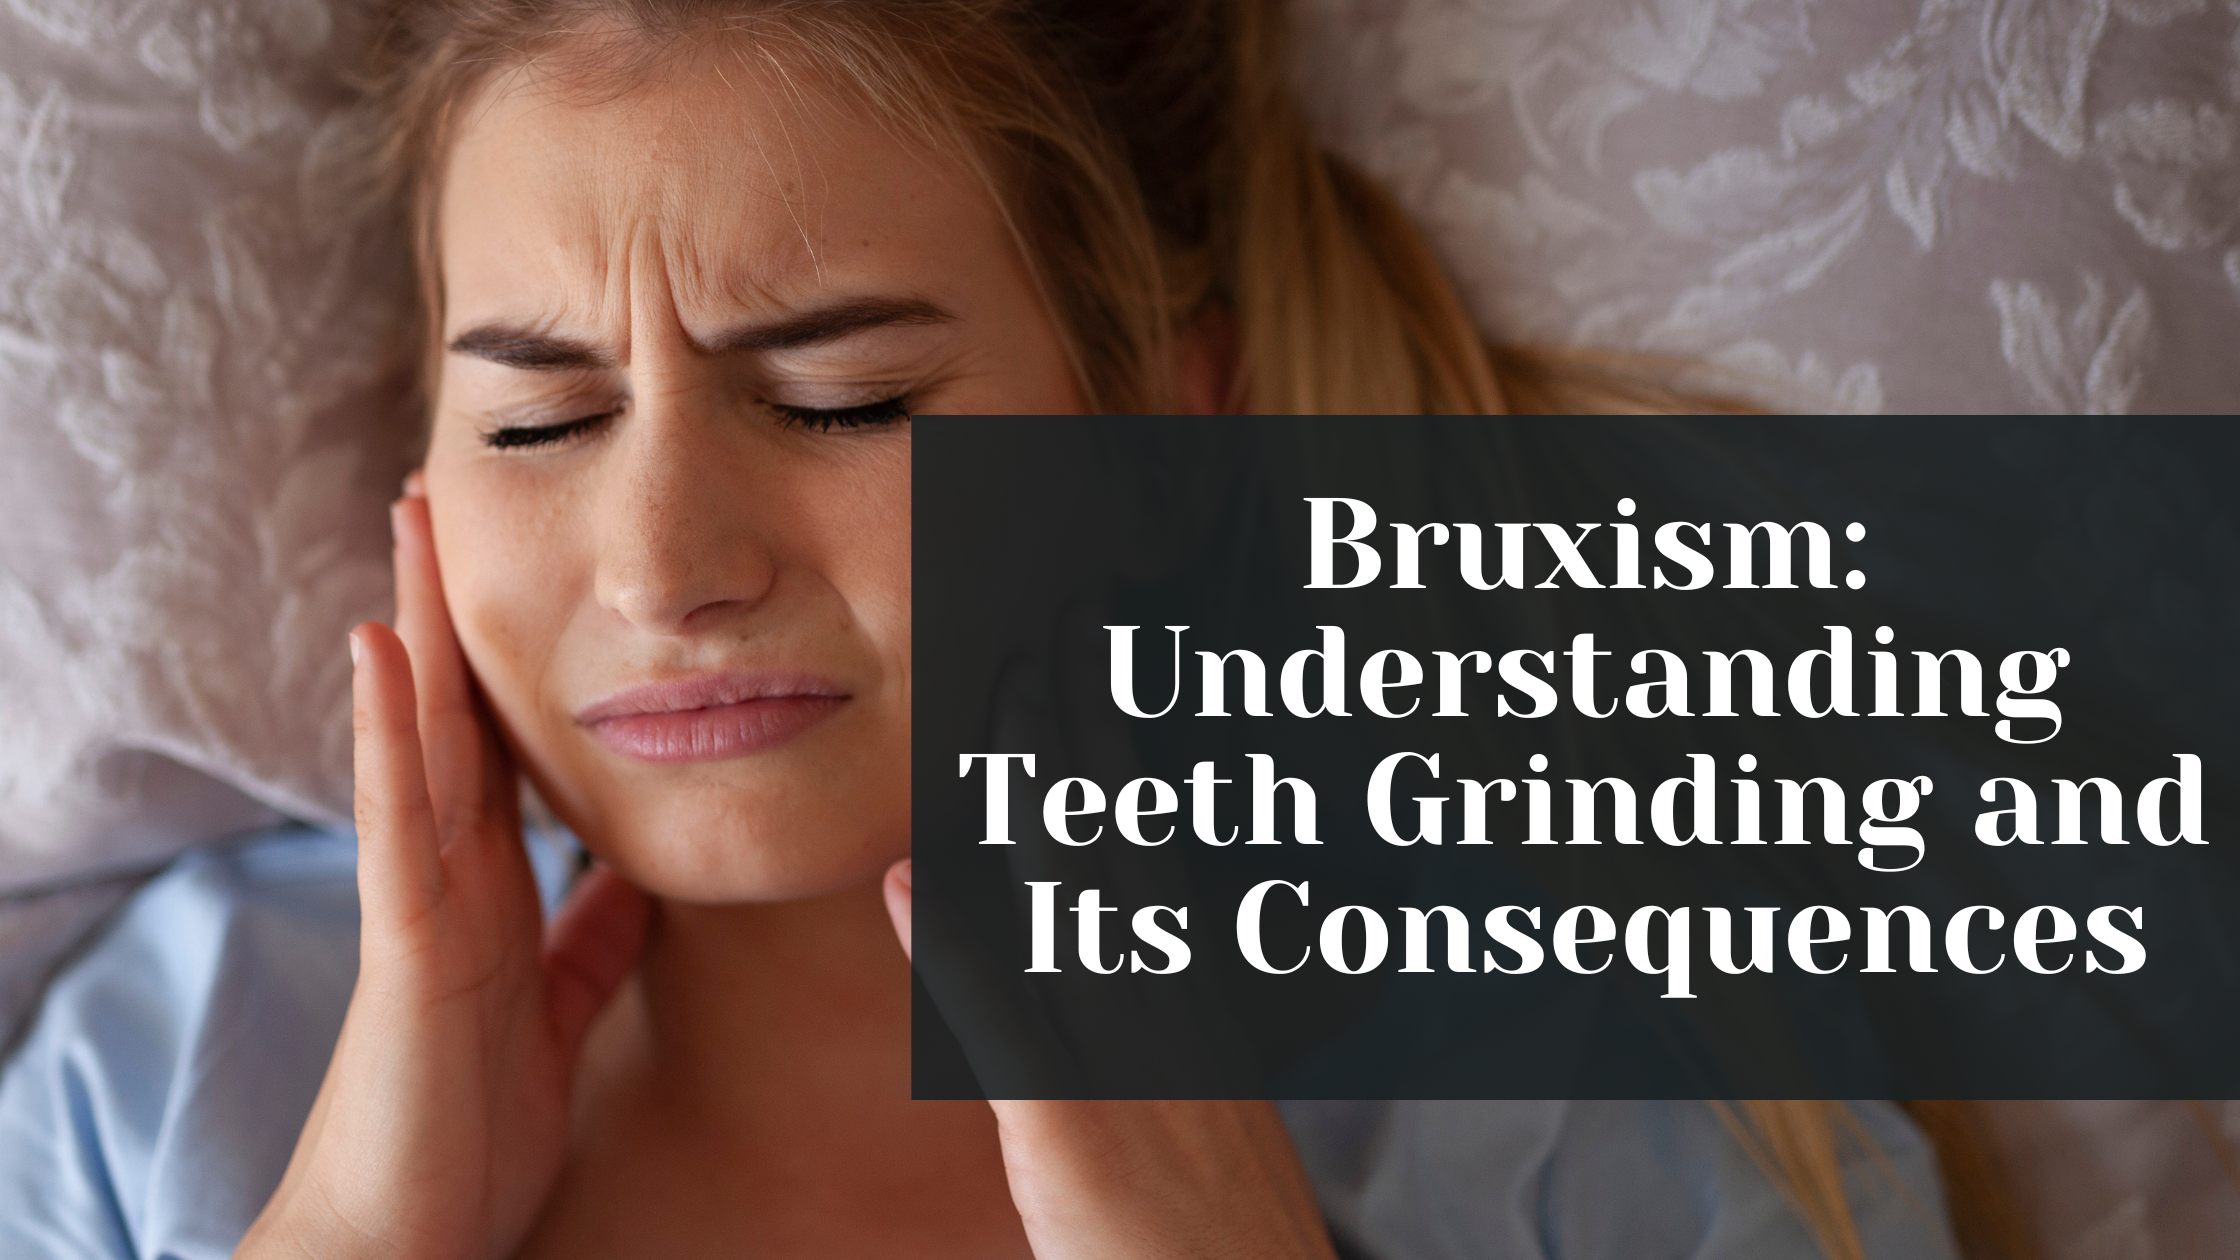 Bruxism: Understanding Teeth Grinding and Its Consequences